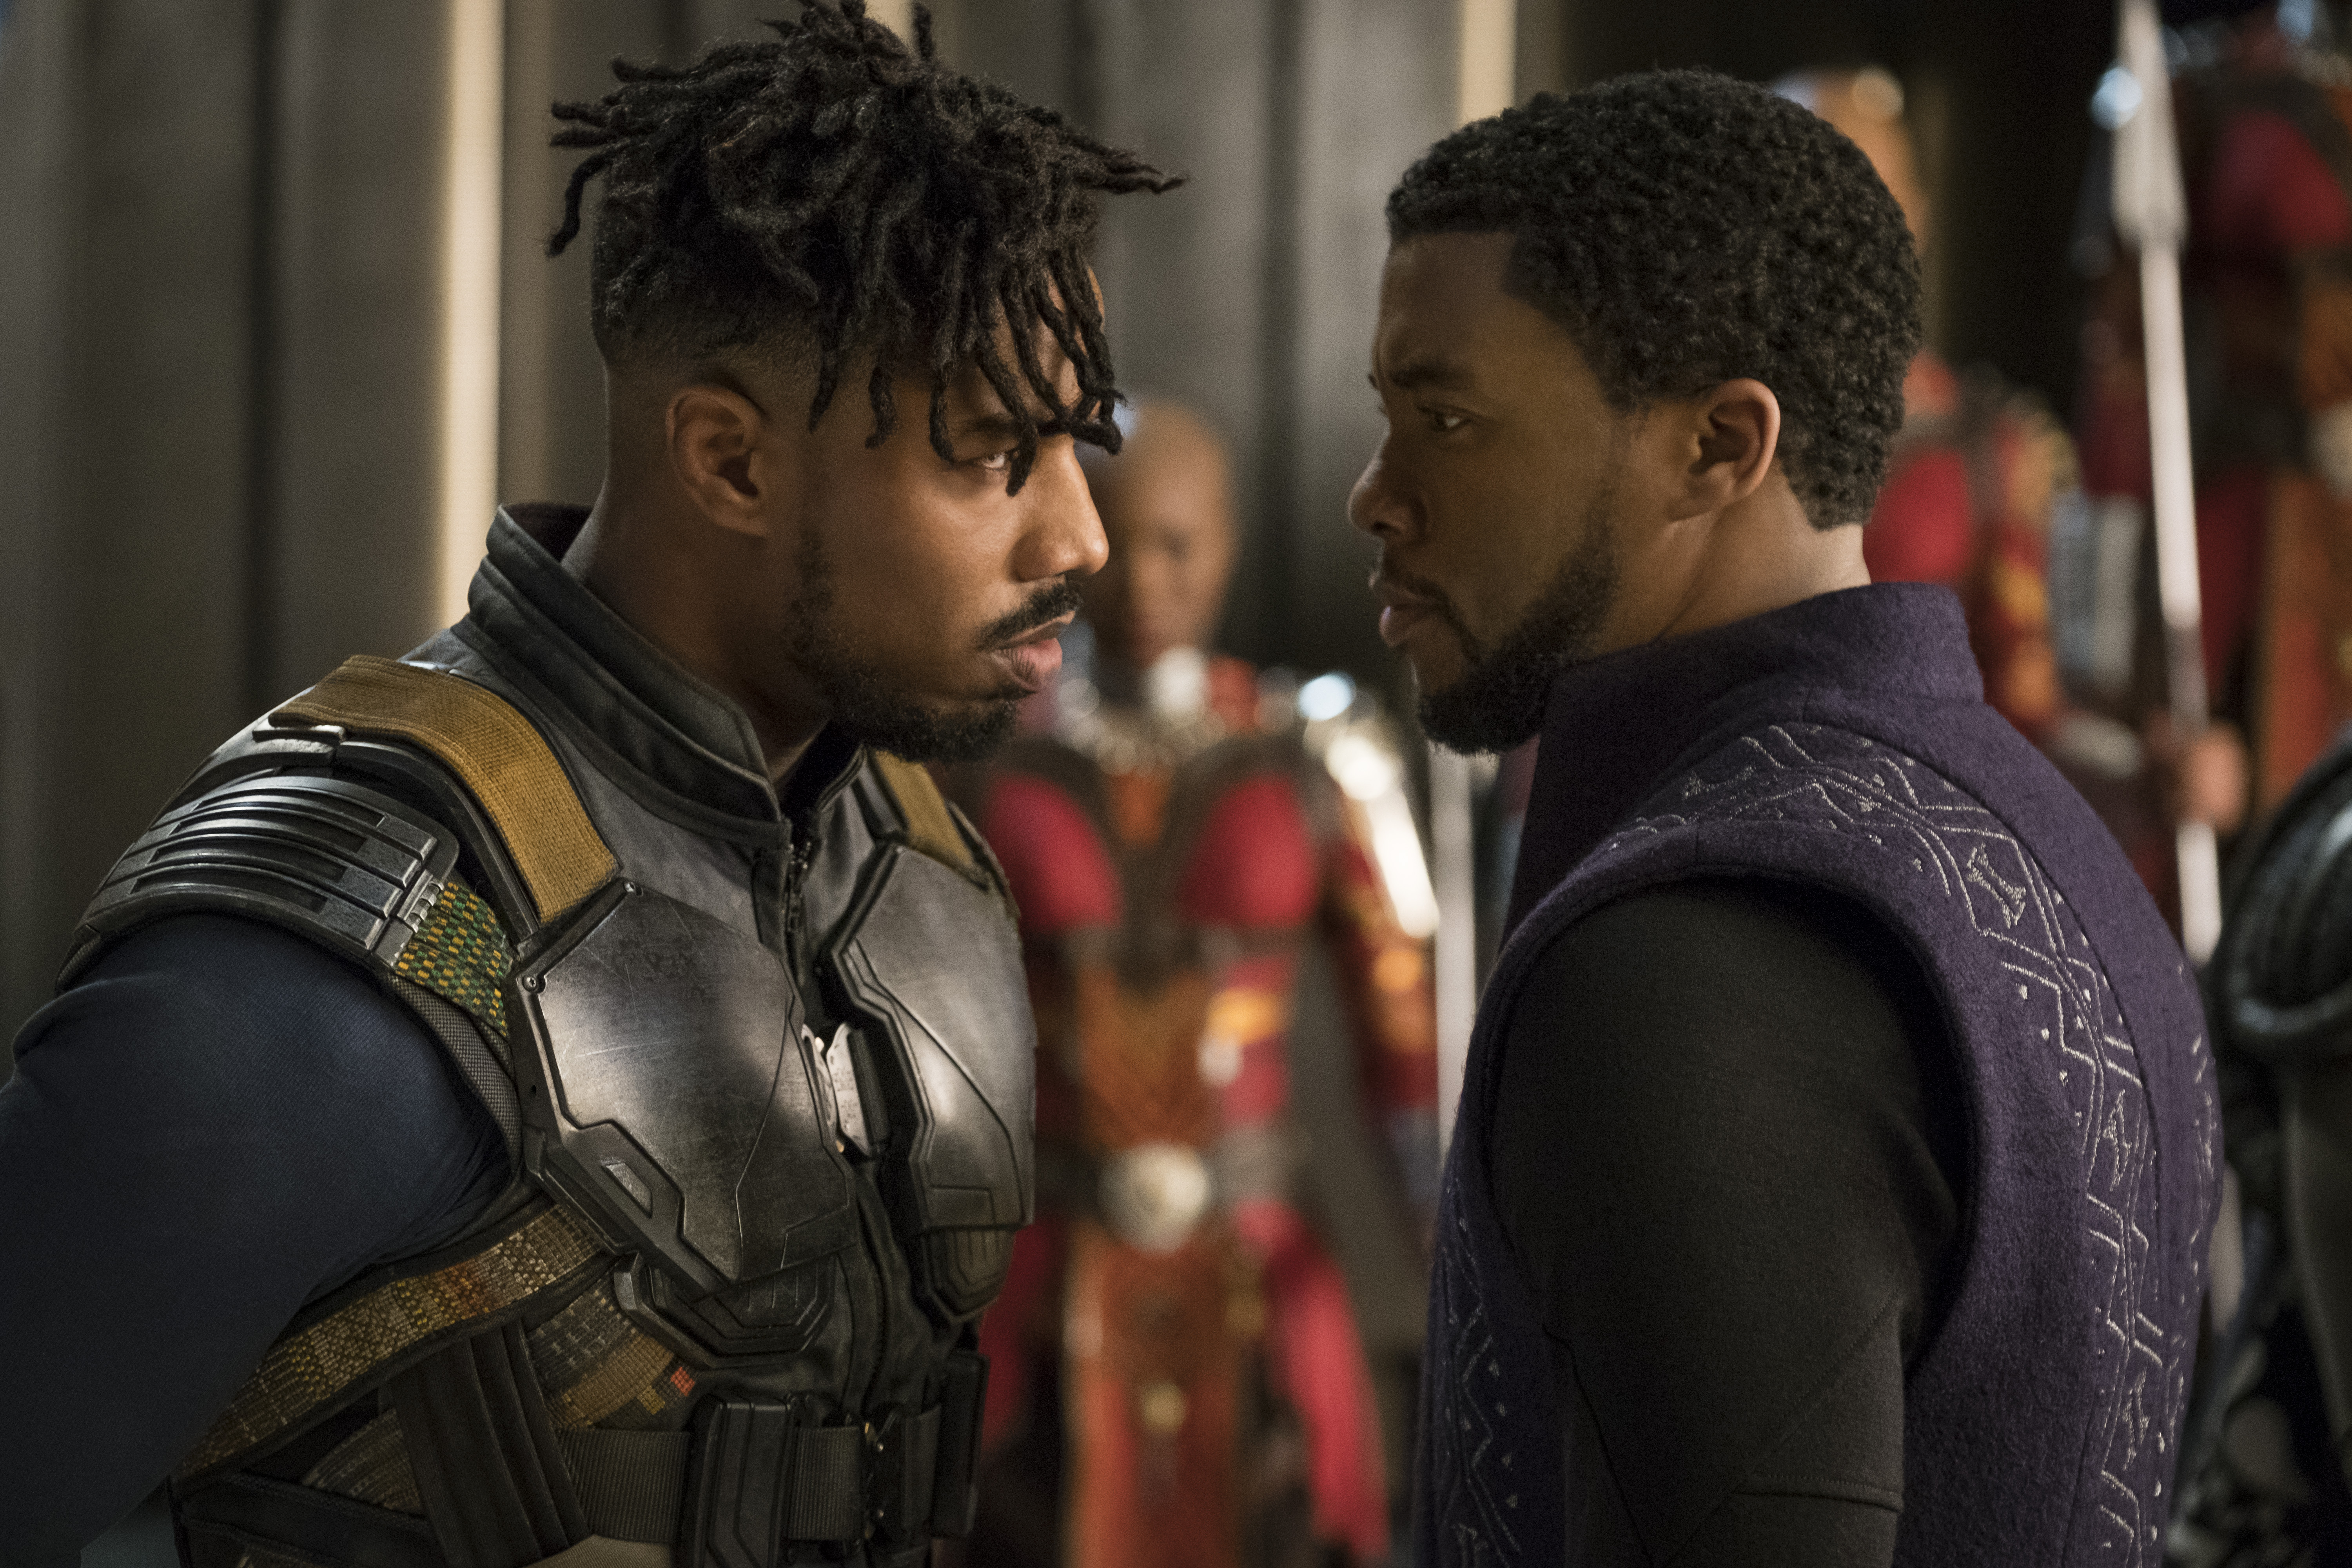 Black Superheroes in Hollywood Act a Lot Like White Superheroes